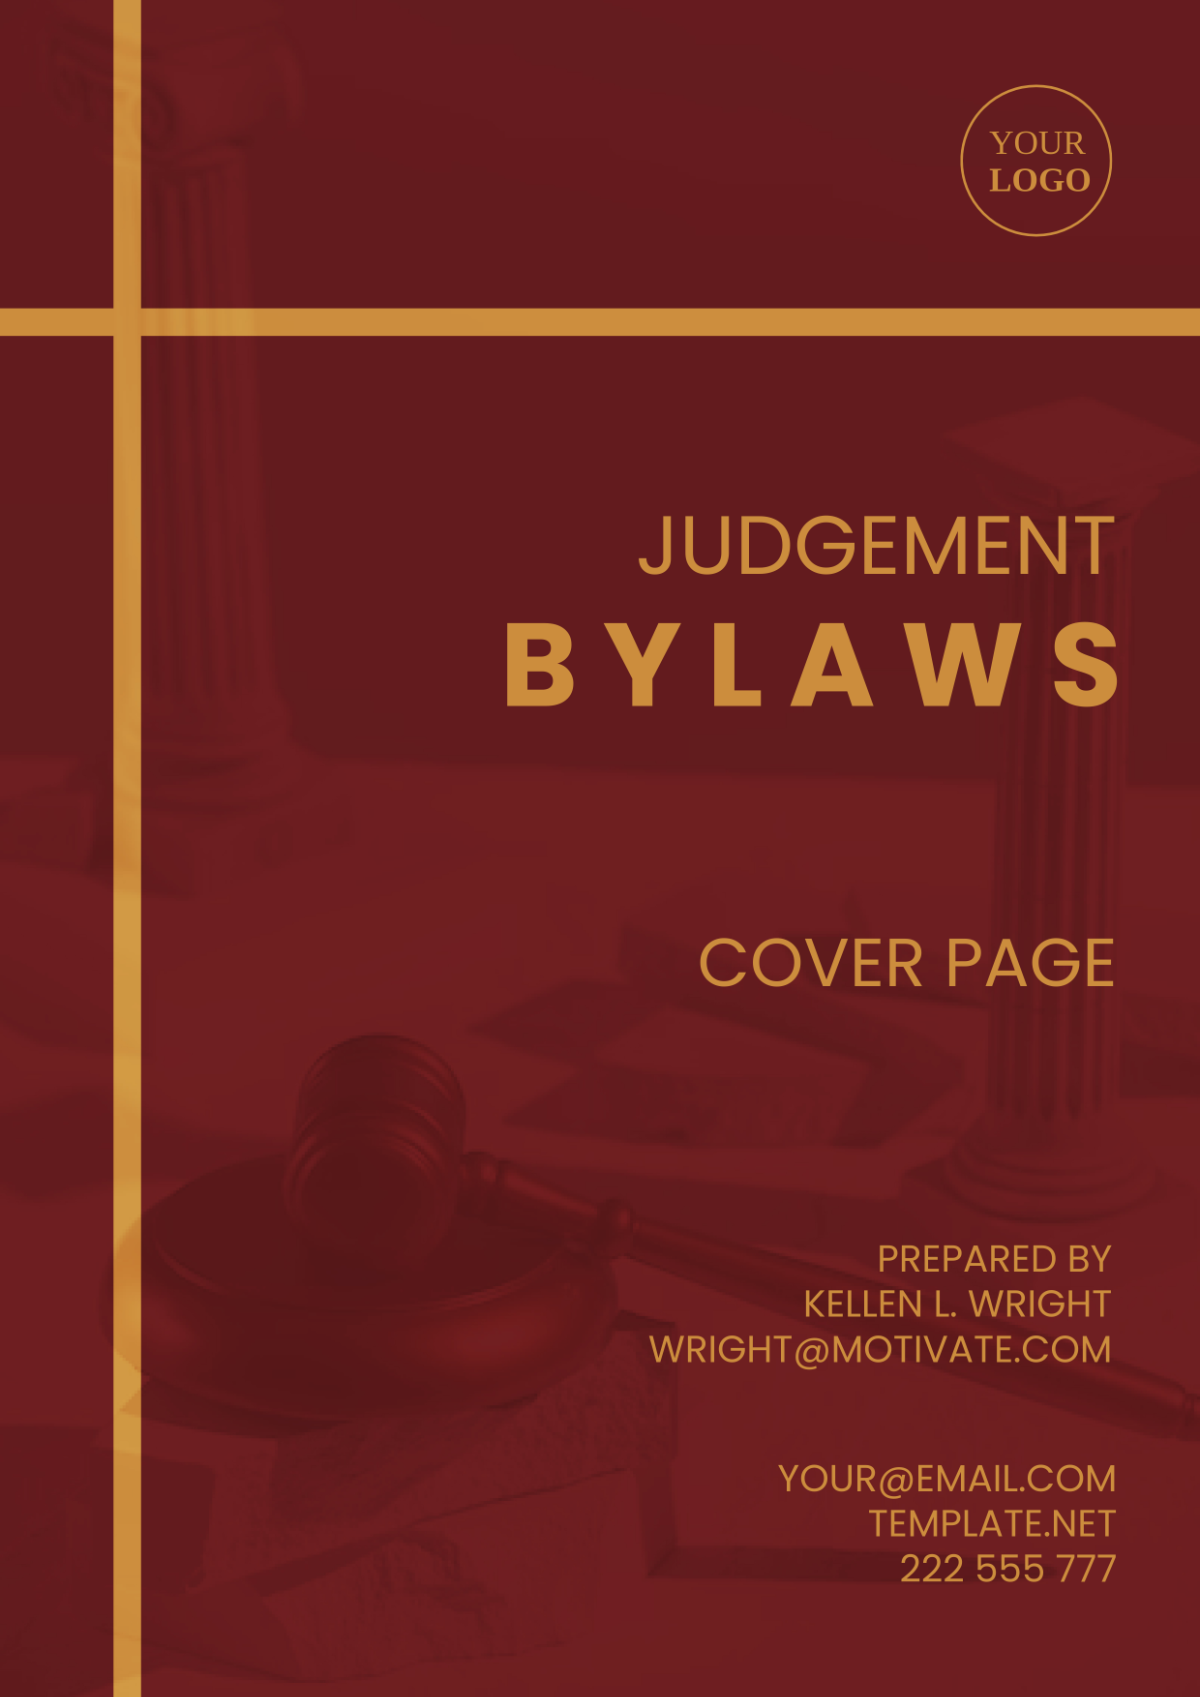 Free Judgement Bylaws Cover Page Template